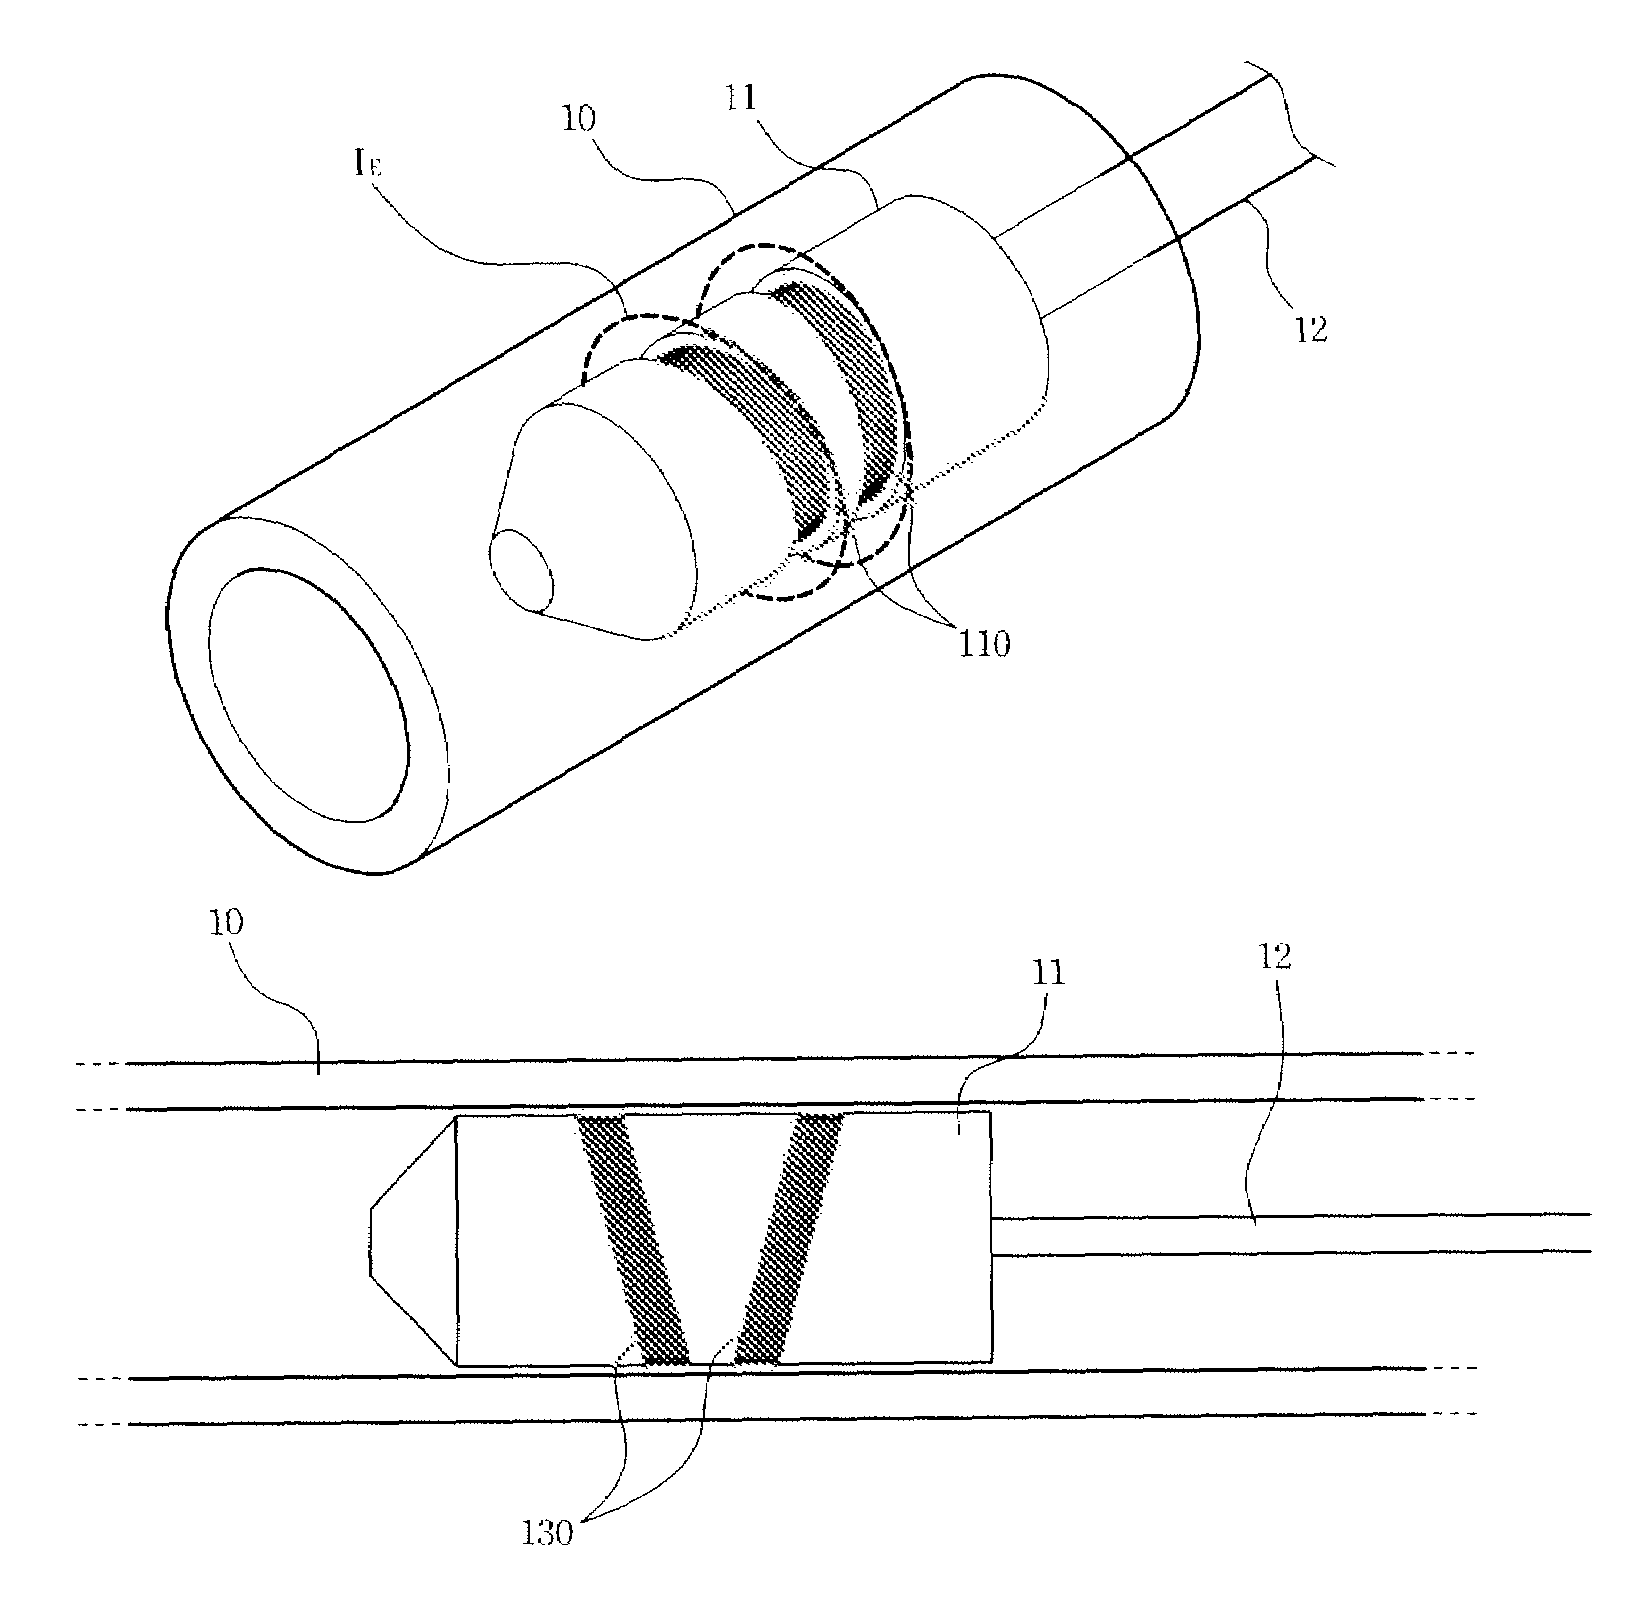 Sensor for detecting surface defects of metal tube using eddy current method